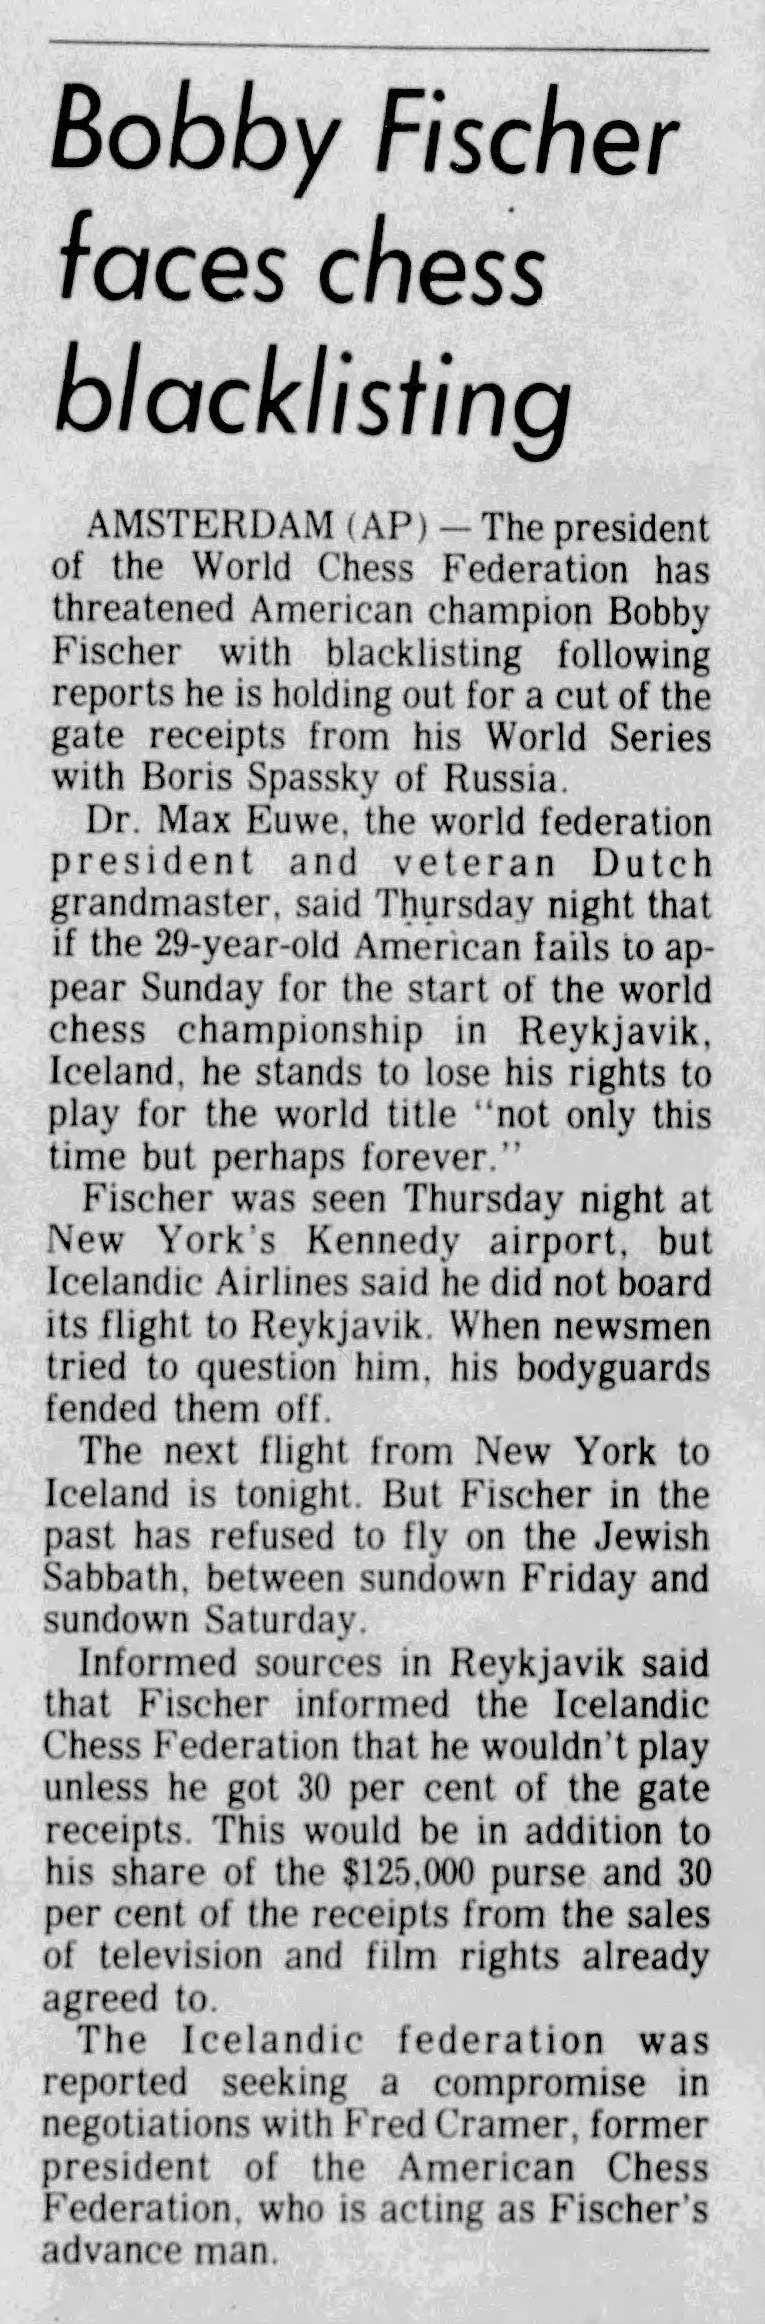 Bobby Fischer Faces Chess Blacklisting